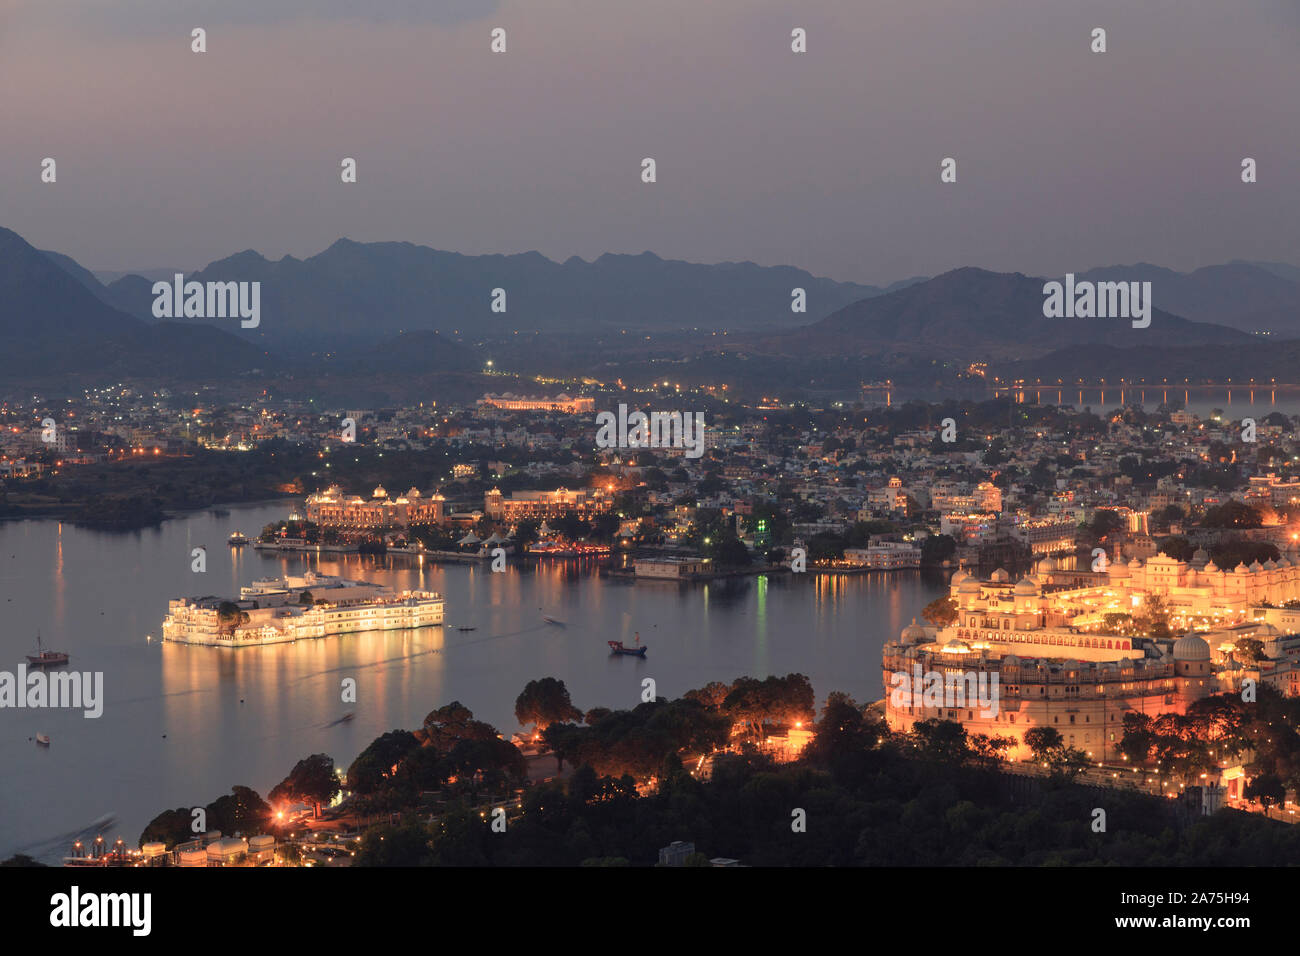 India, Rajasthan, Udaipur, elevated view of Lake Pichola and Udaipur City Stock Photo